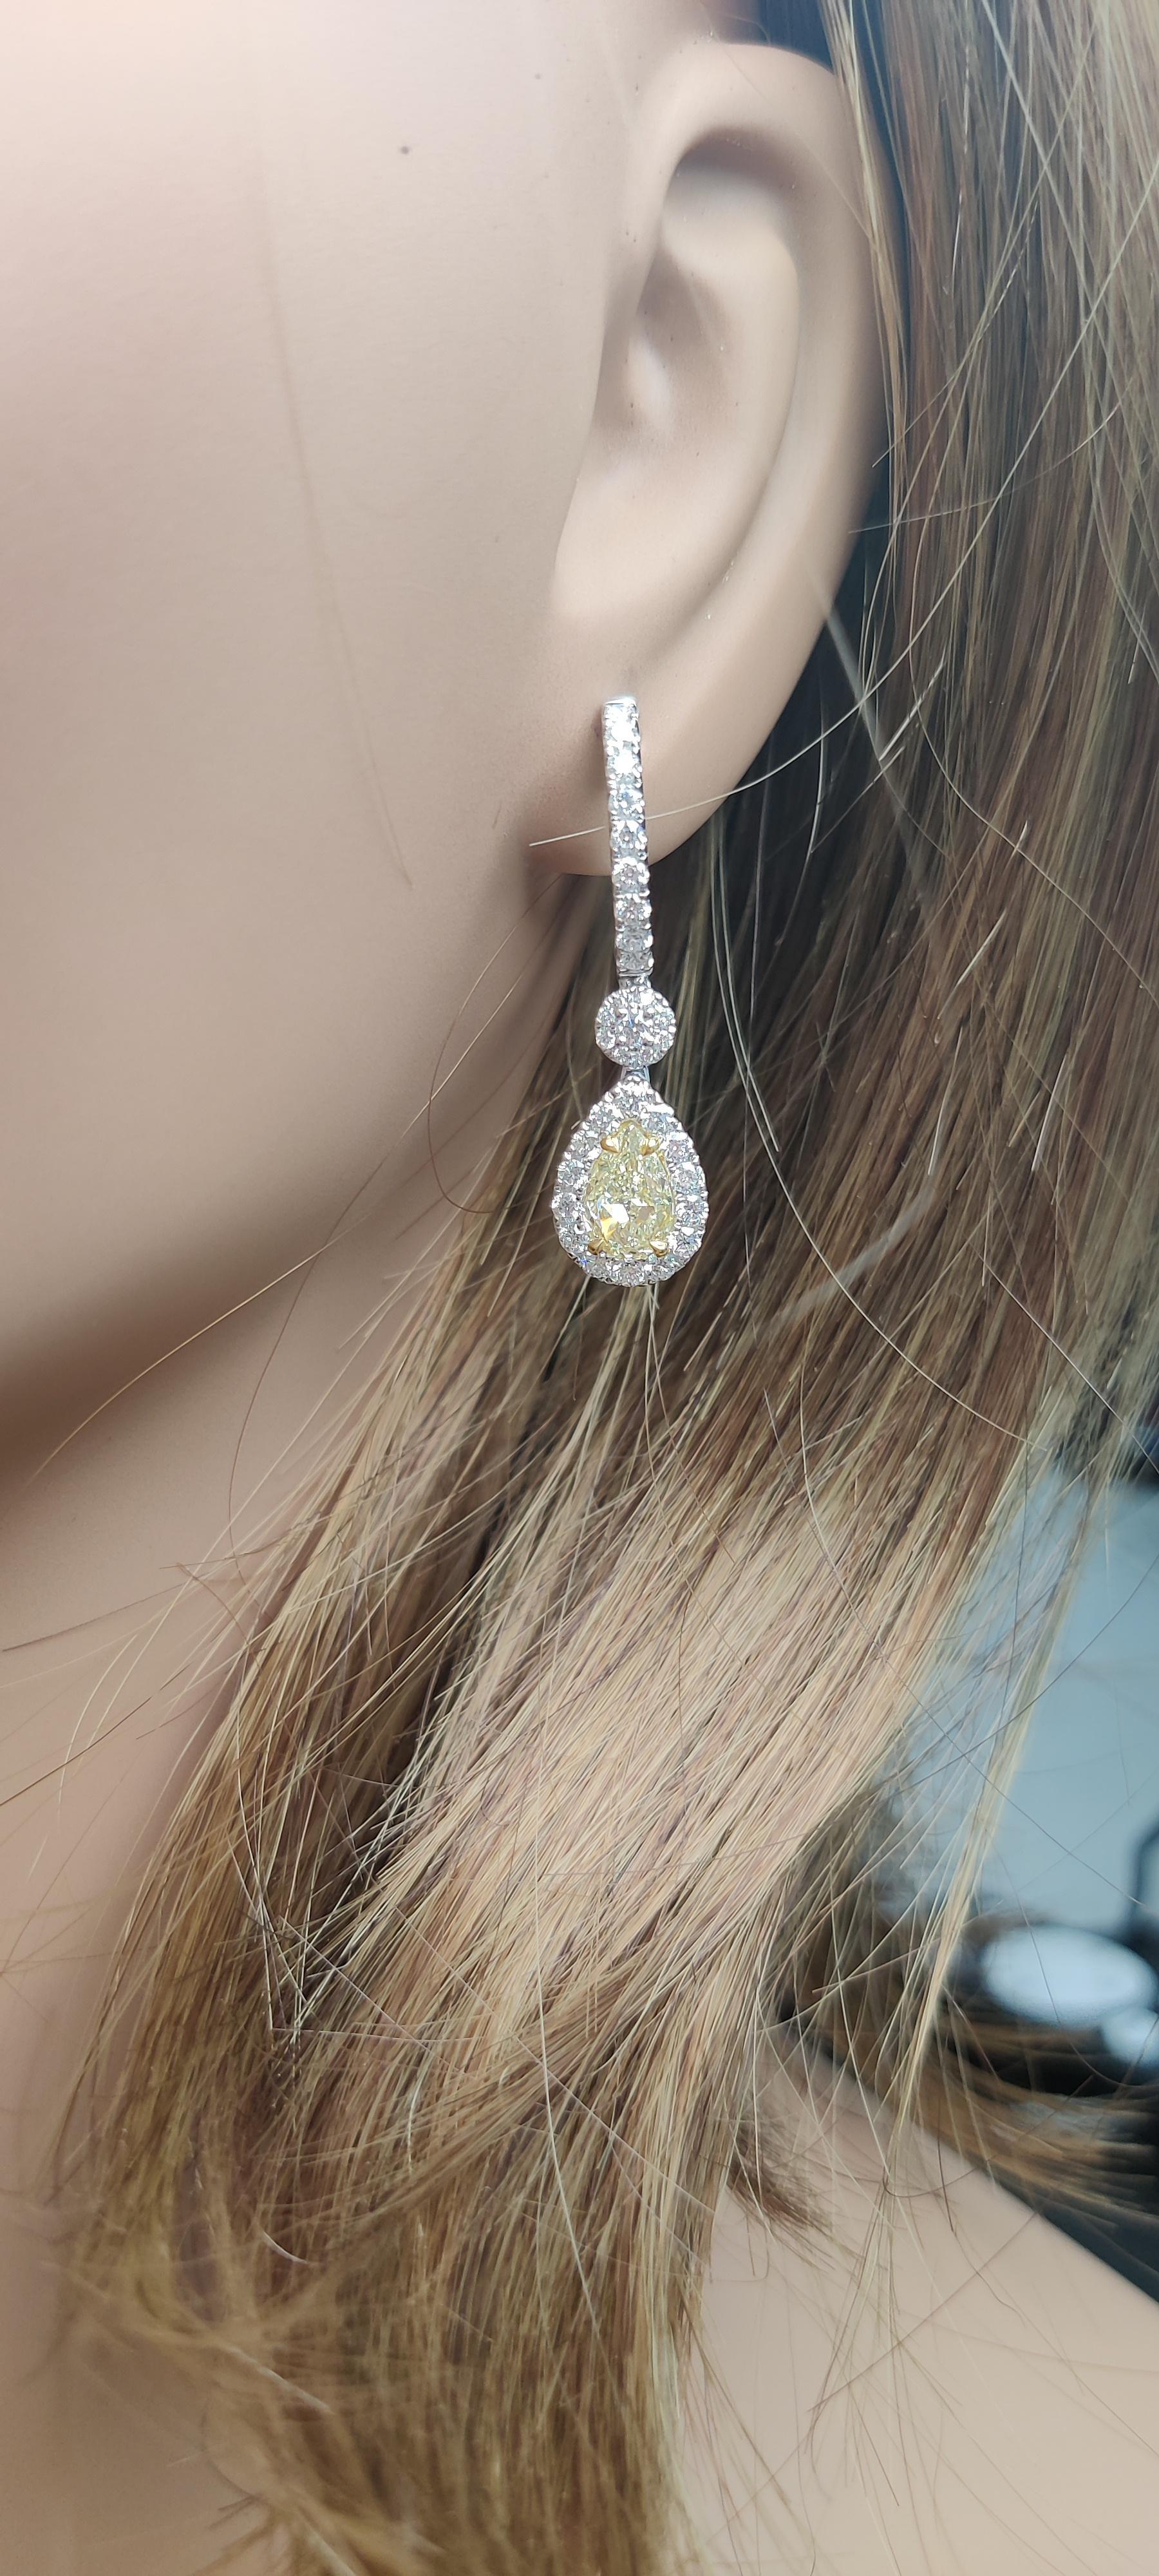 RareGemWorld's classic diamond earrings. Mounted in a beautiful 18K Yellow and White Gold setting with natural pear cut yellow diamonds. The yellow diamonds are surrounded by round natural white diamond melee. These earrings are guaranteed to